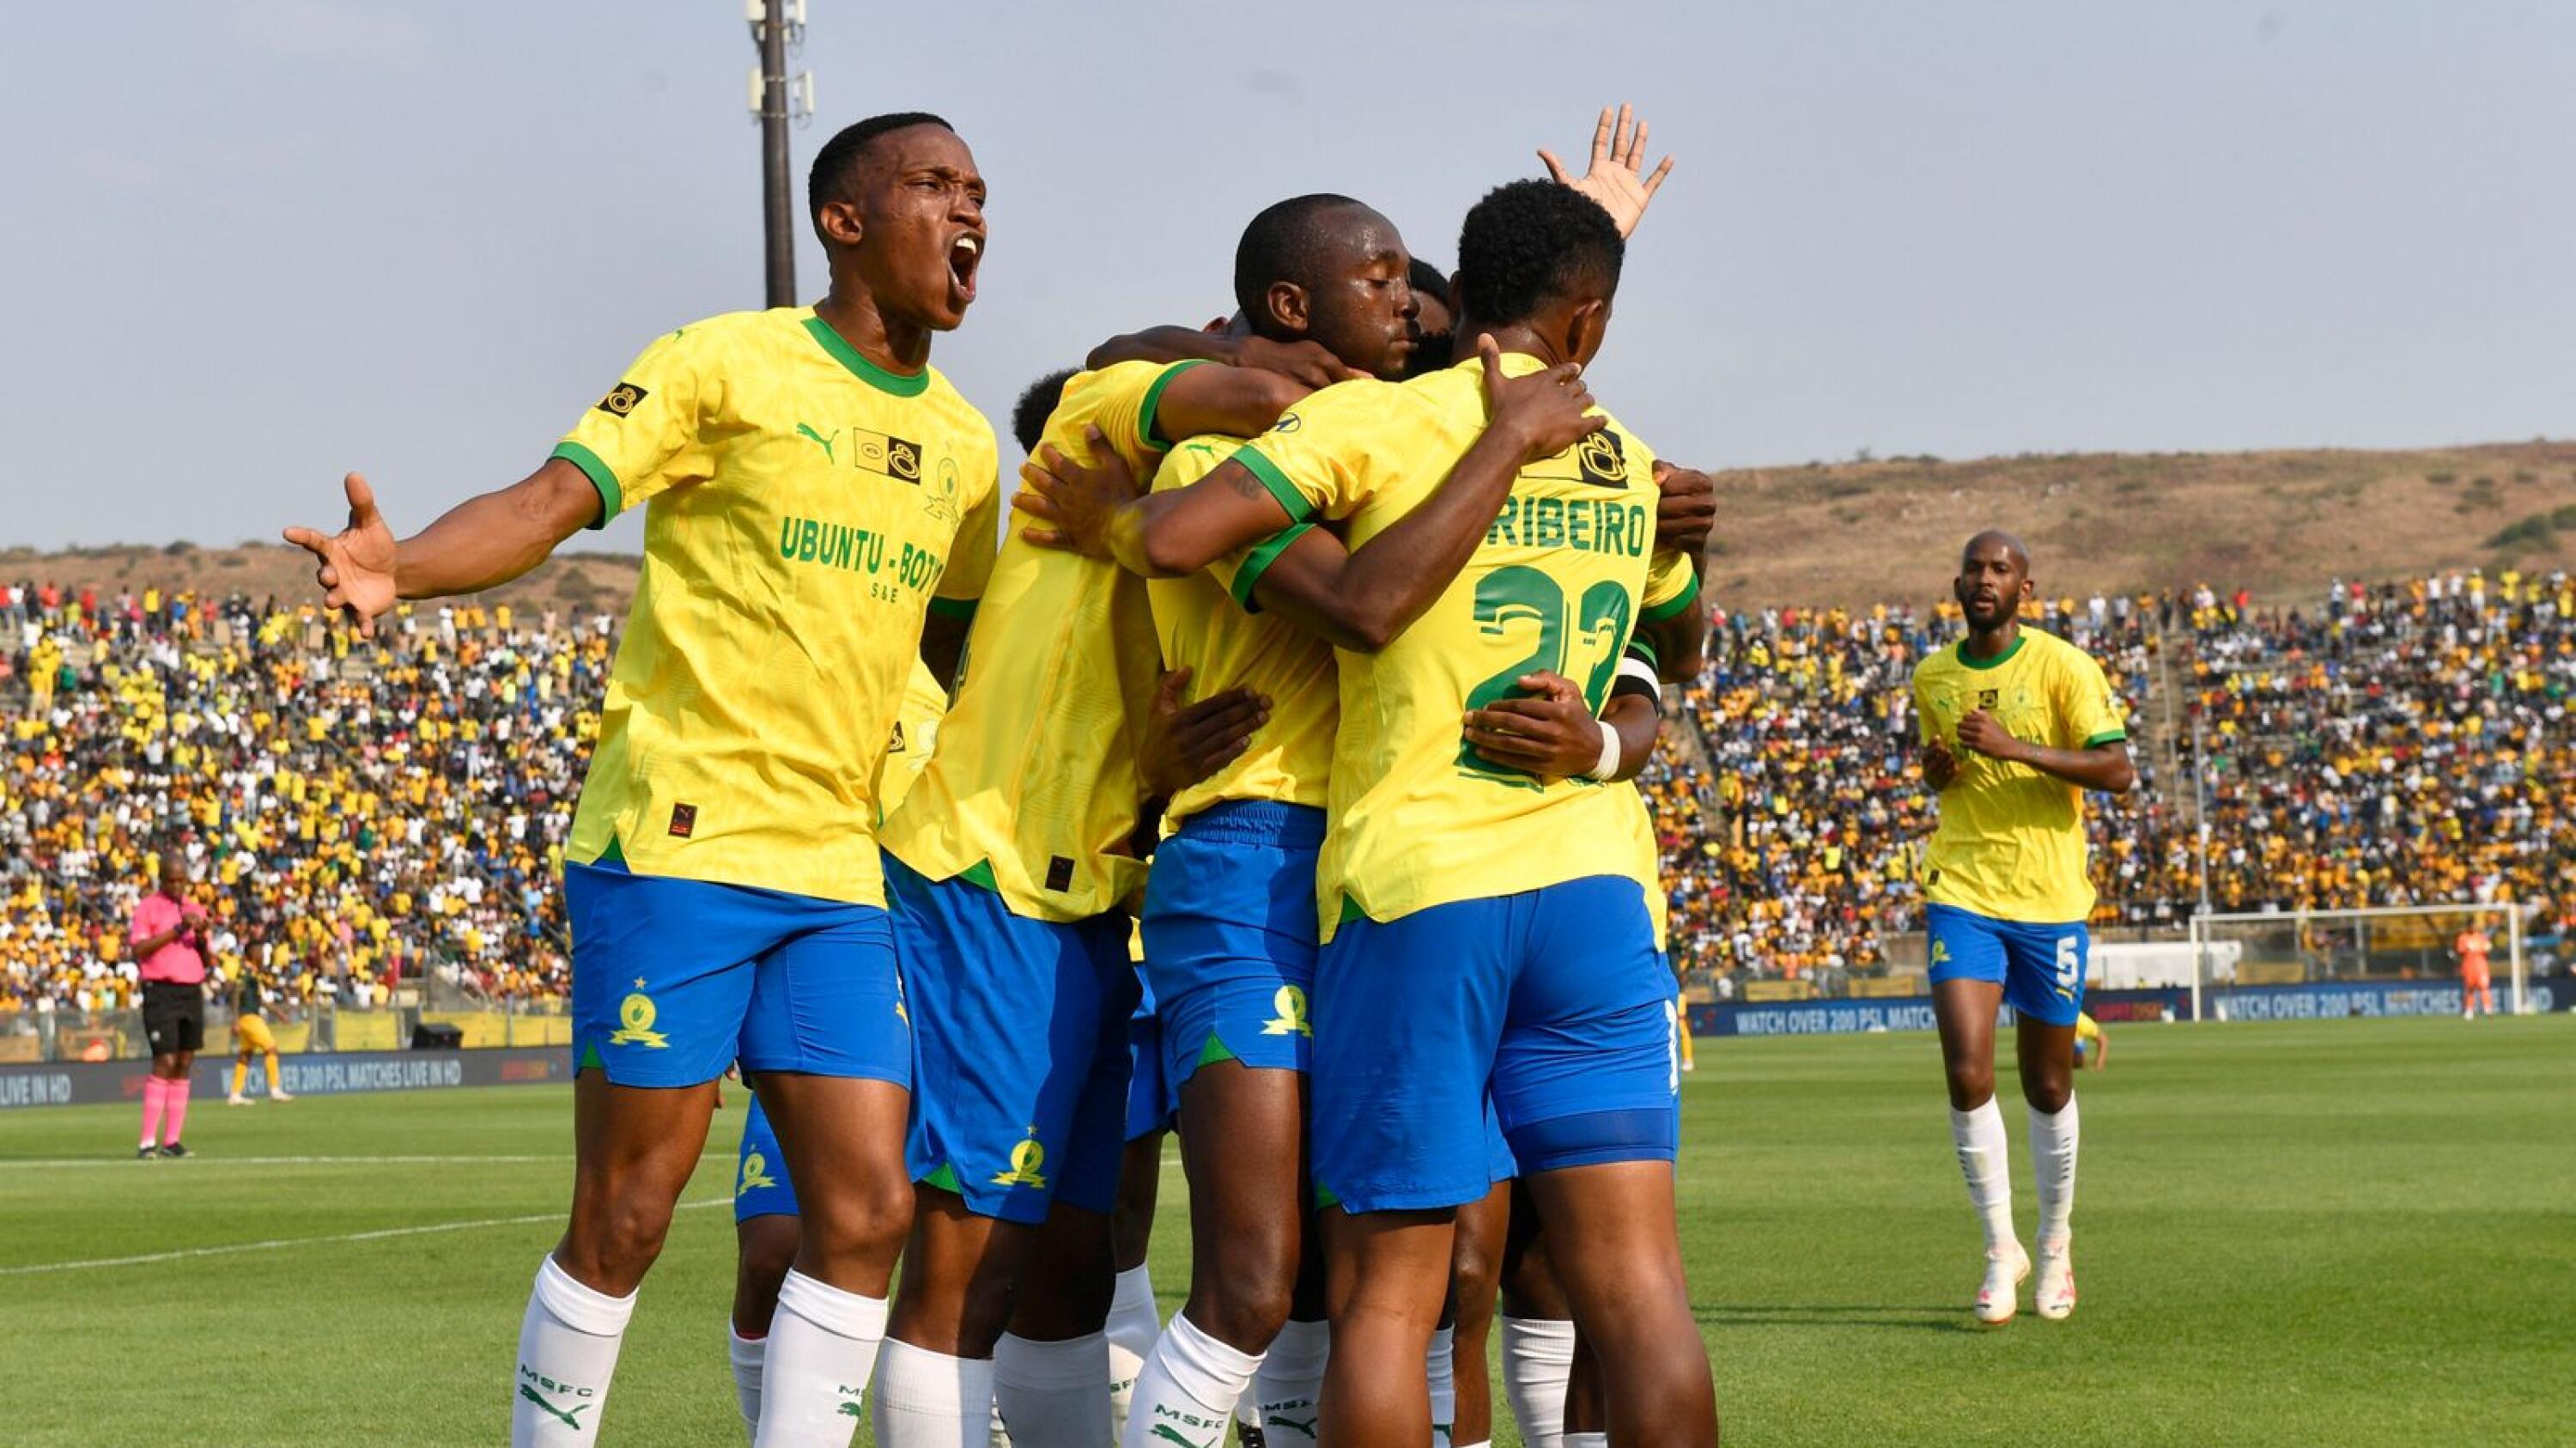 Mamelodi Sundowns’ Peter Shalulile celebrates with teammates after scoring a goal during their MTN8 semi-final second leg against Kaizer Chiefs